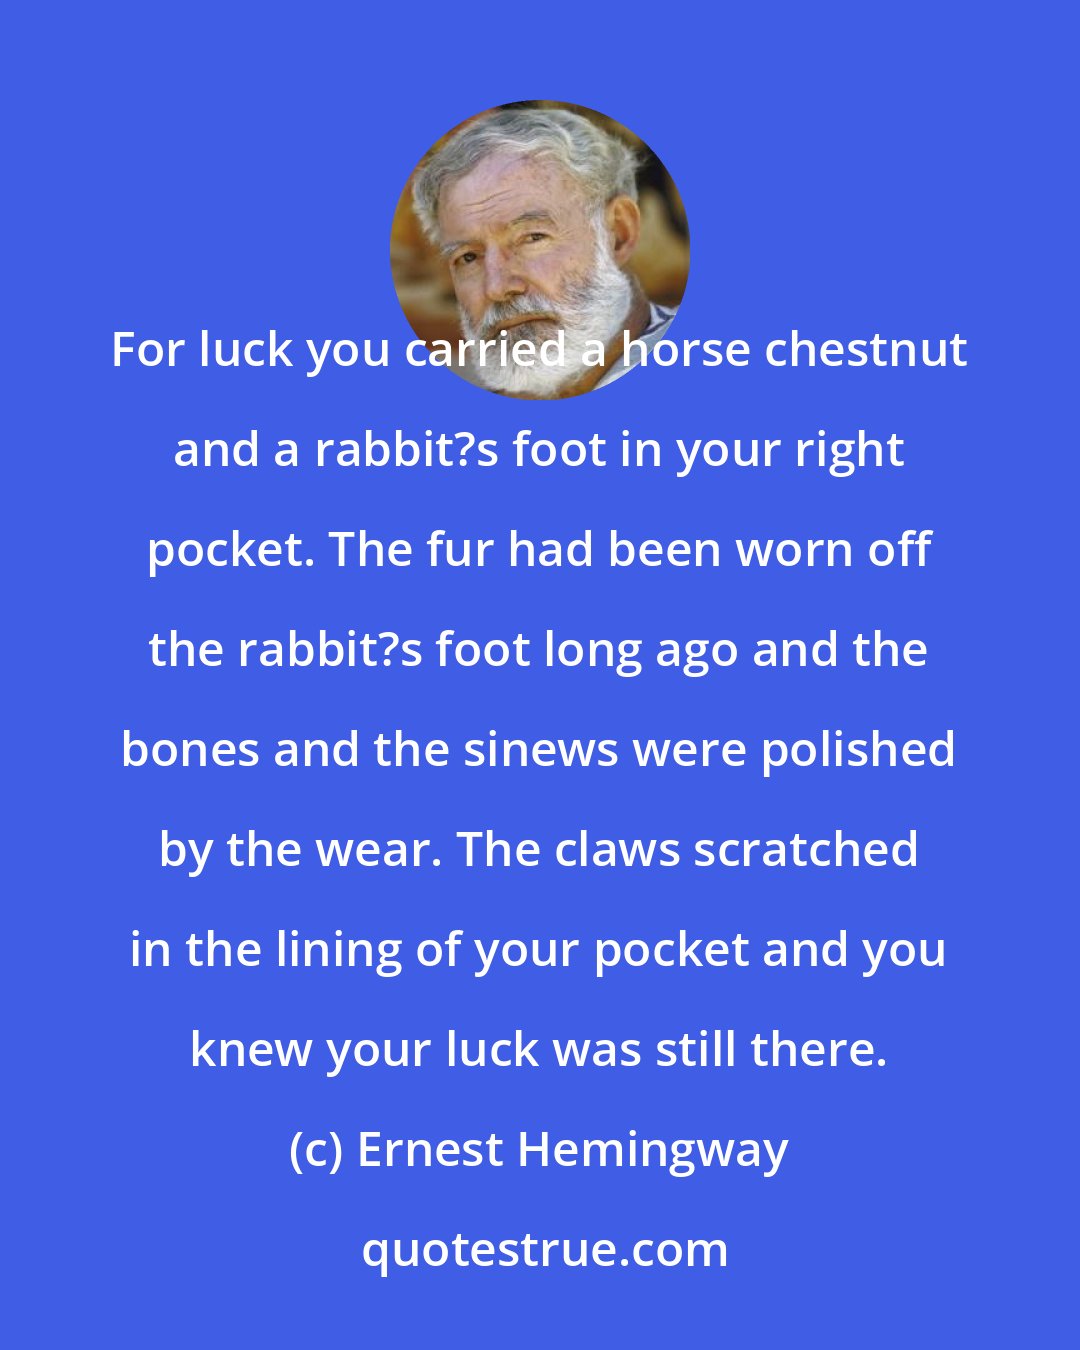 Ernest Hemingway: For luck you carried a horse chestnut and a rabbit?s foot in your right pocket. The fur had been worn off the rabbit?s foot long ago and the bones and the sinews were polished by the wear. The claws scratched in the lining of your pocket and you knew your luck was still there.